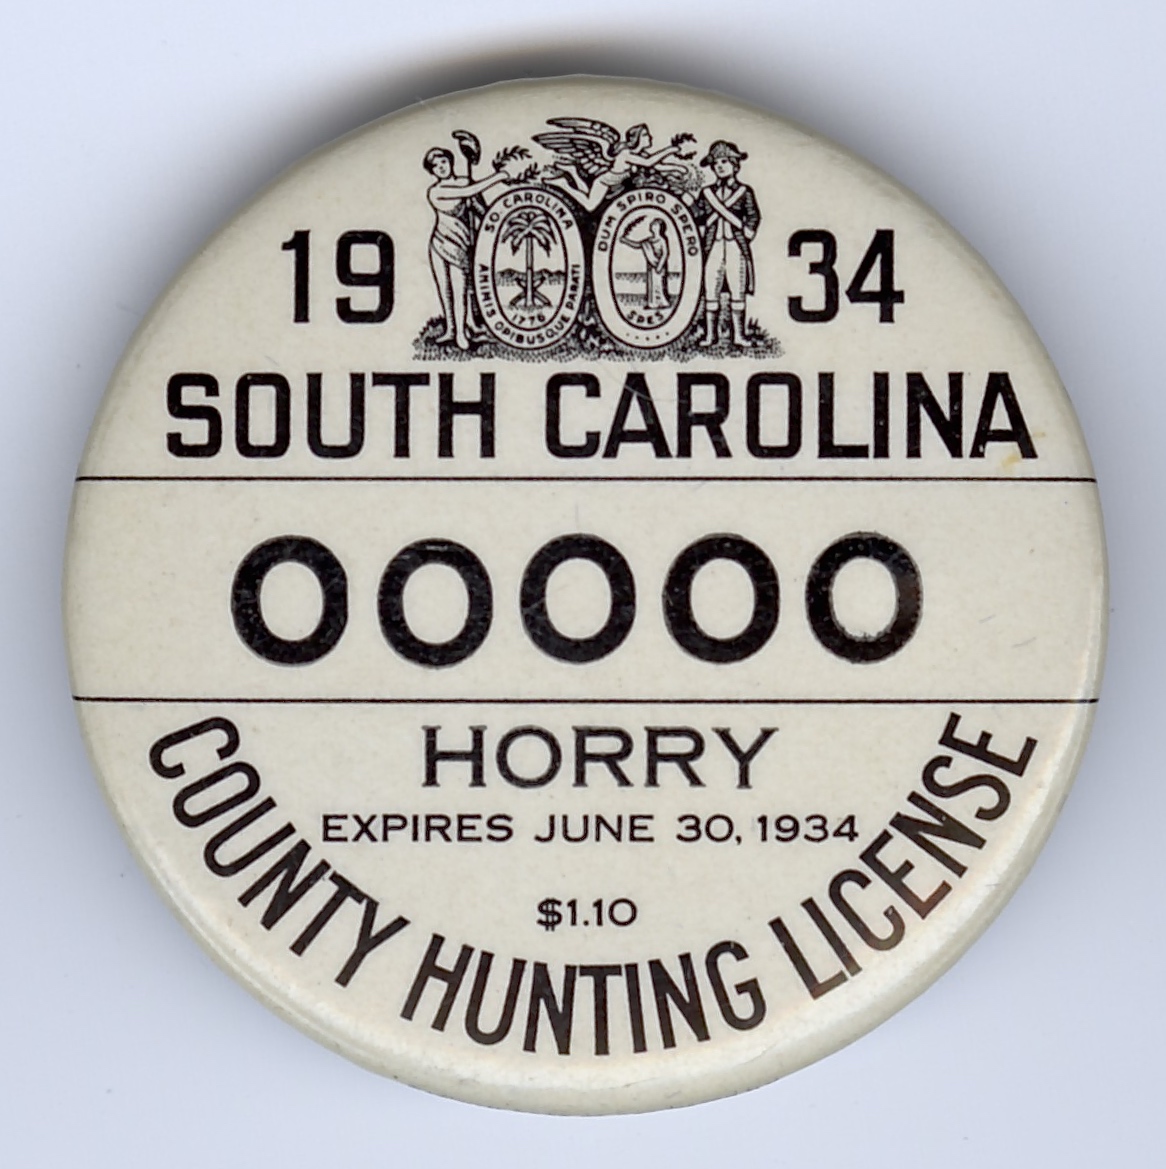 1934 South Carolina Hunting License sample button for Horry County